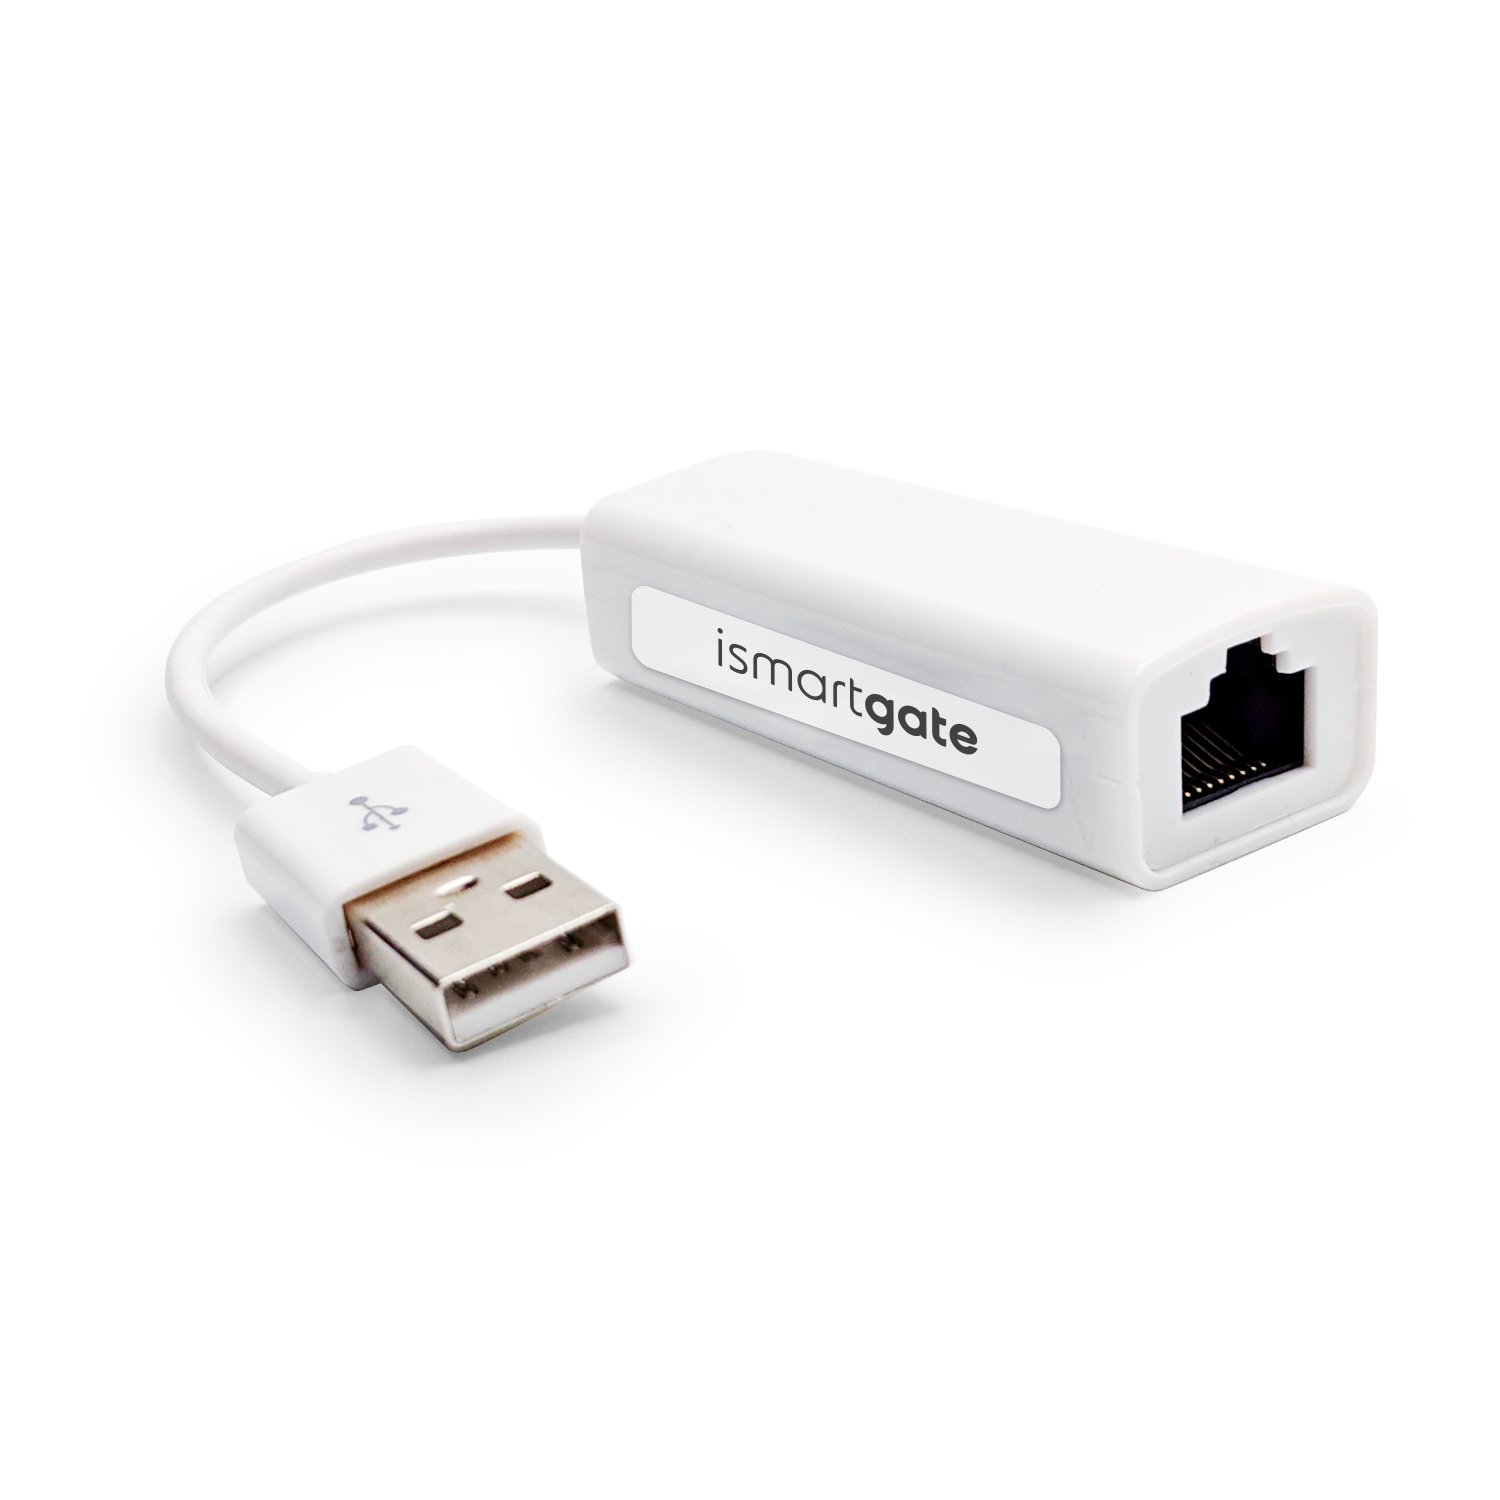 inadvertently Intrusion Bot USB to Ethernet adaptor to connect ismartgate to your home network